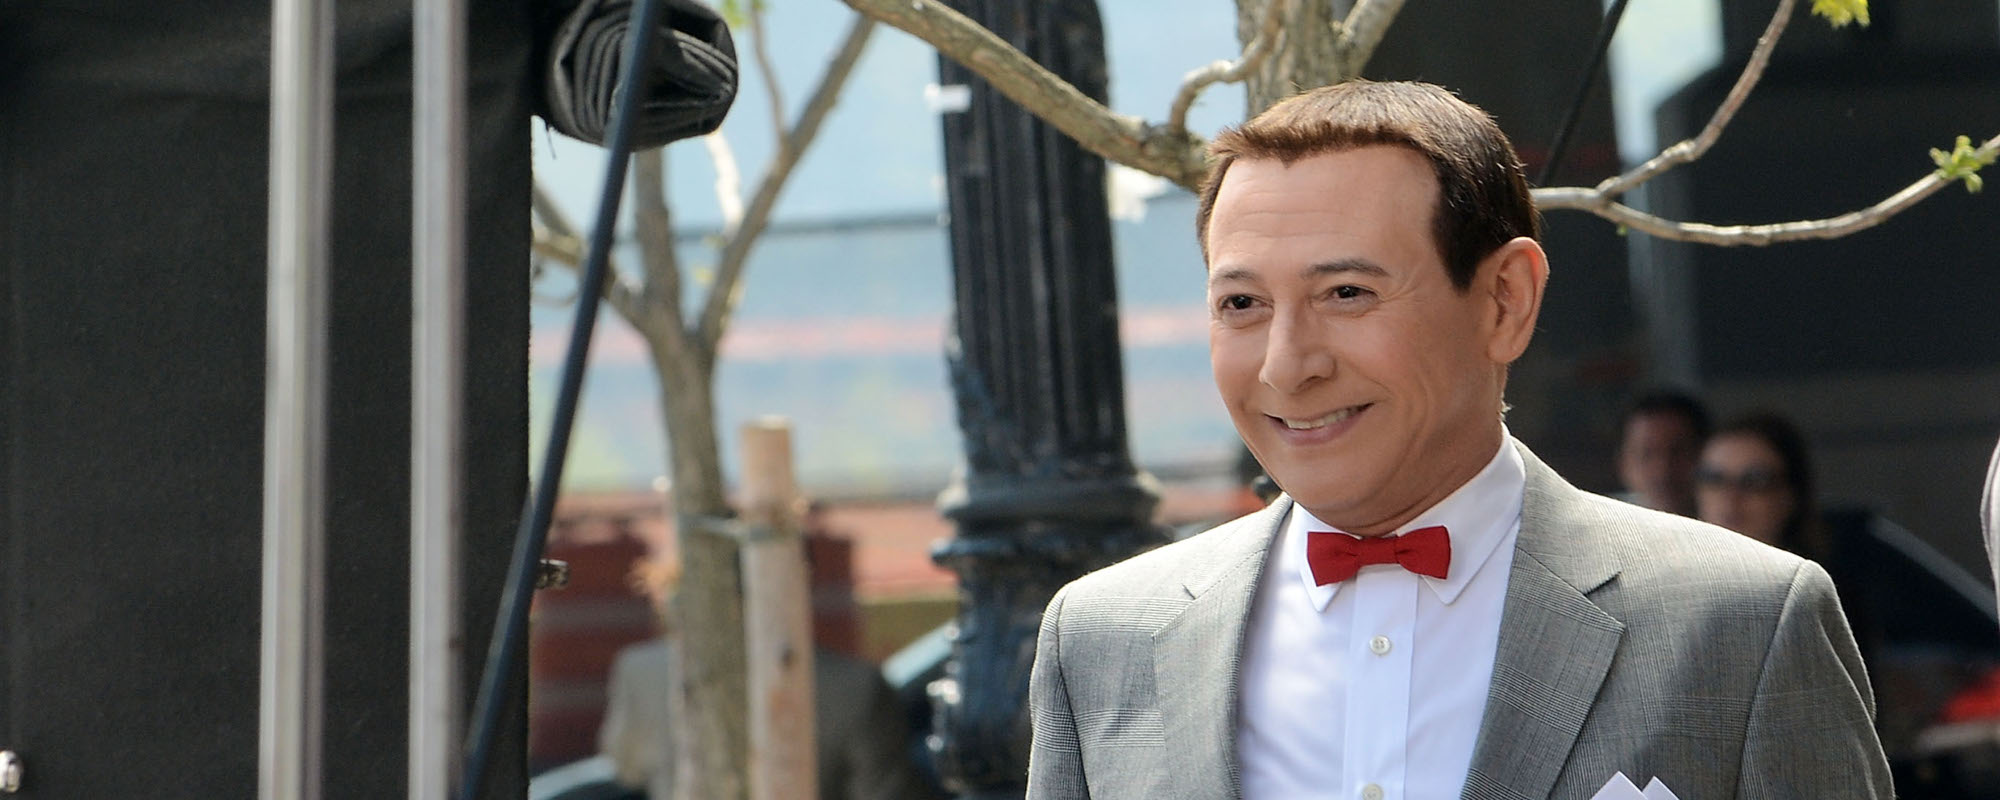 Who Wrote: The 1986 ‘Pee-wee’s Playhouse’ Theme Song Performed by Cyndi Lauper